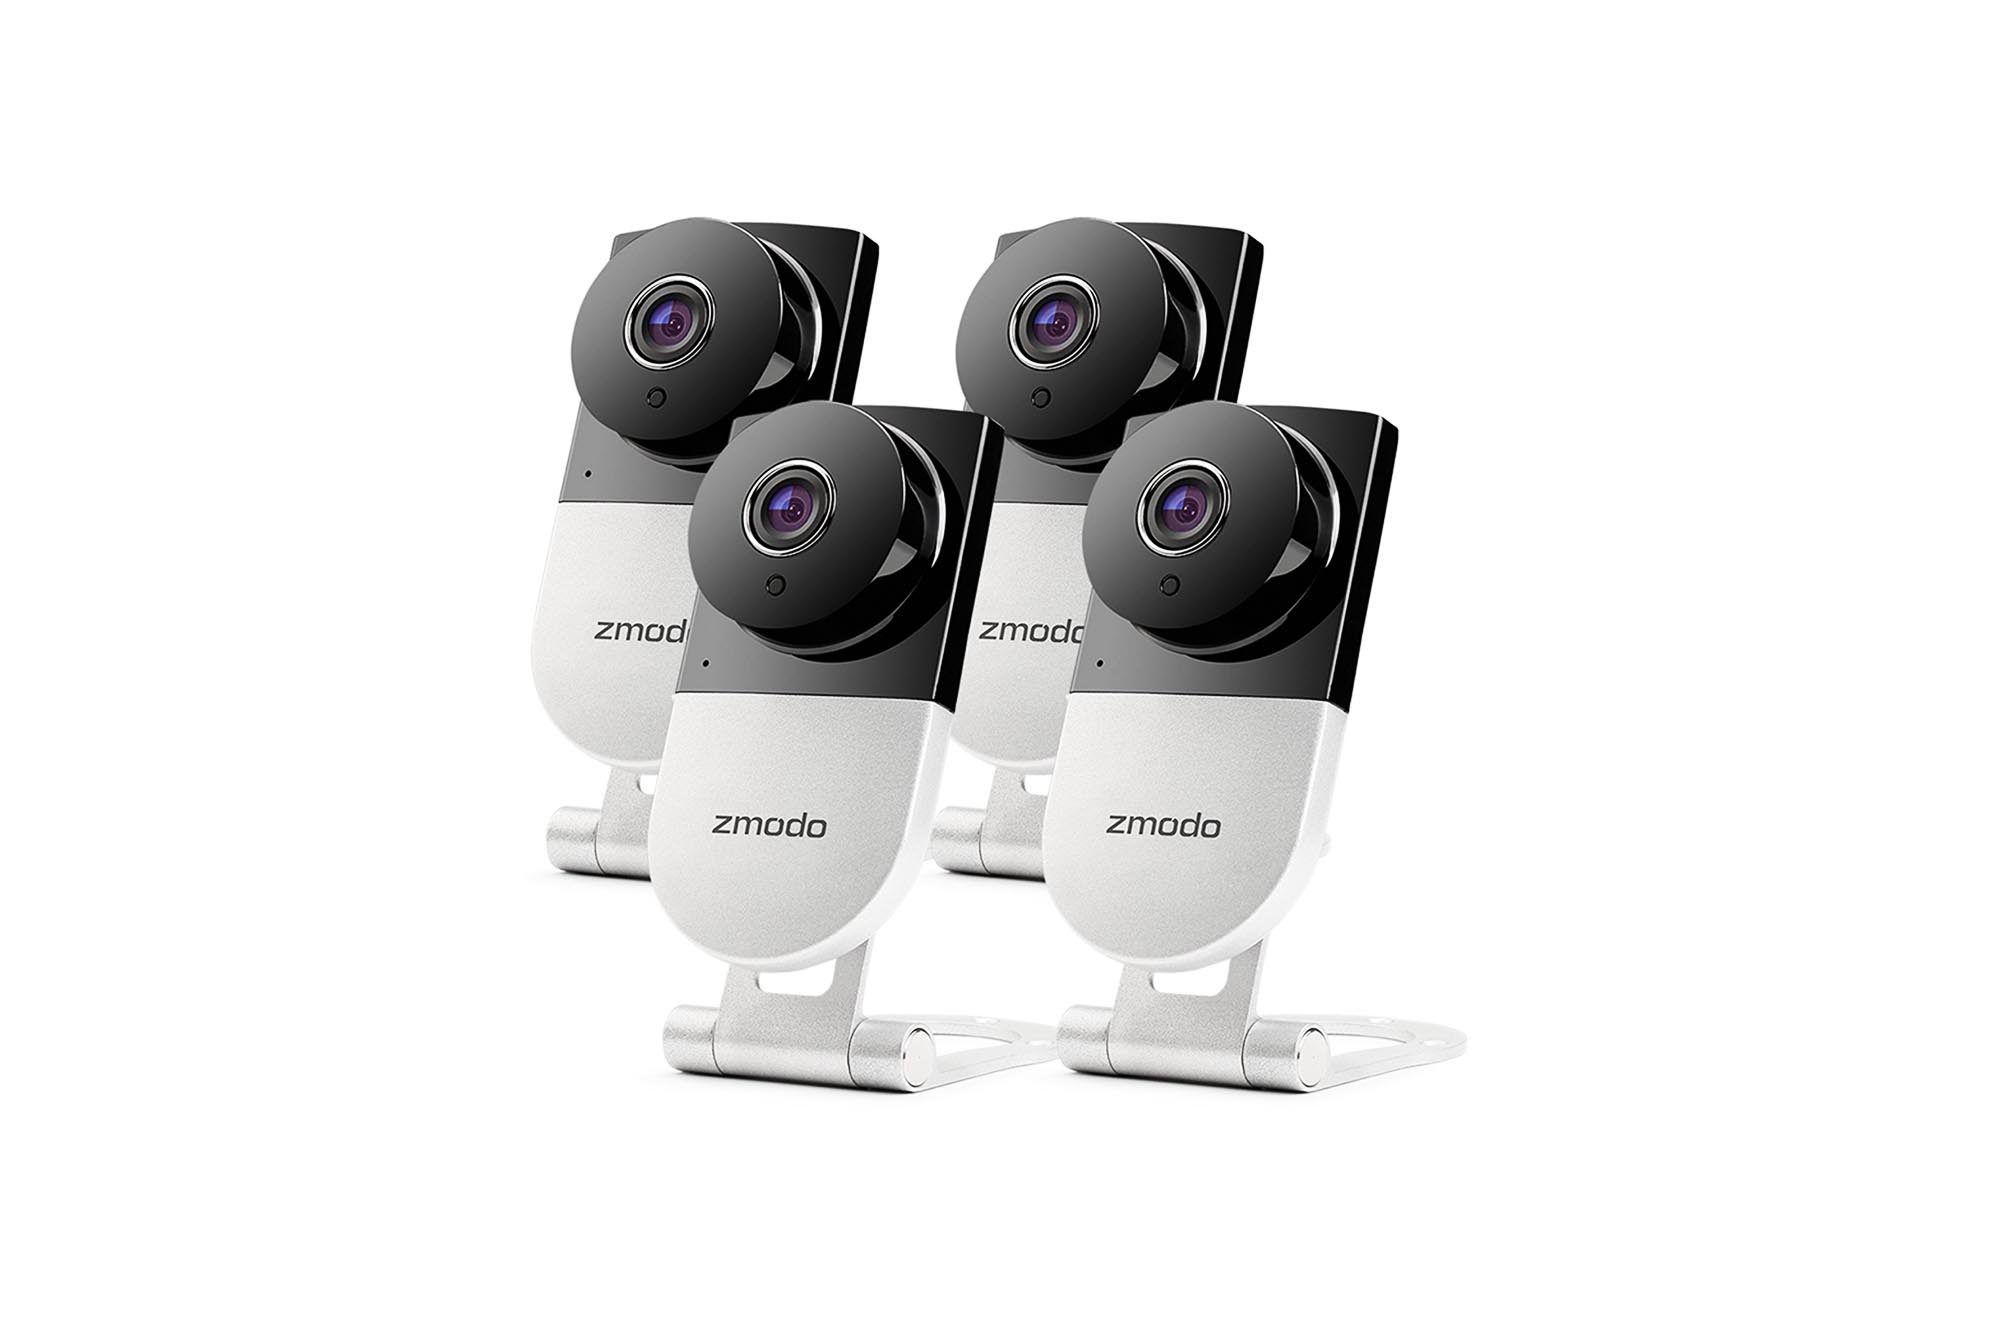 Zmodo 720p HD Wireless Home Surveillance Camera System - 4 Cameras with Night Vision and Two-way Audio